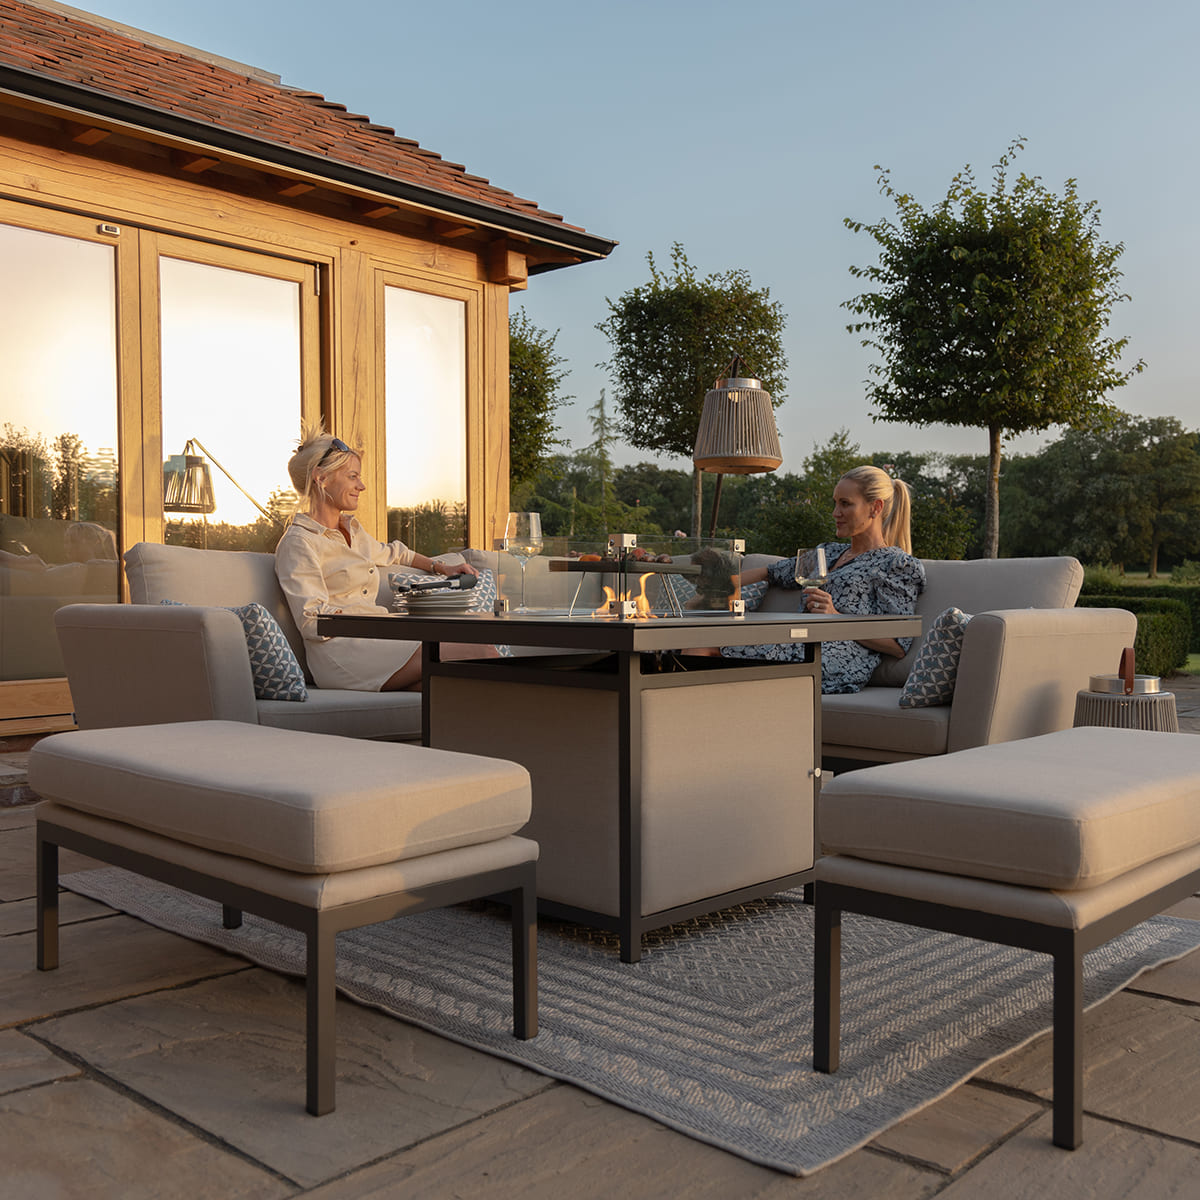 Maze - Outdoor Fabric Pulse Deluxe Square Corner Dining Set with Firepit Table - Oatmeal